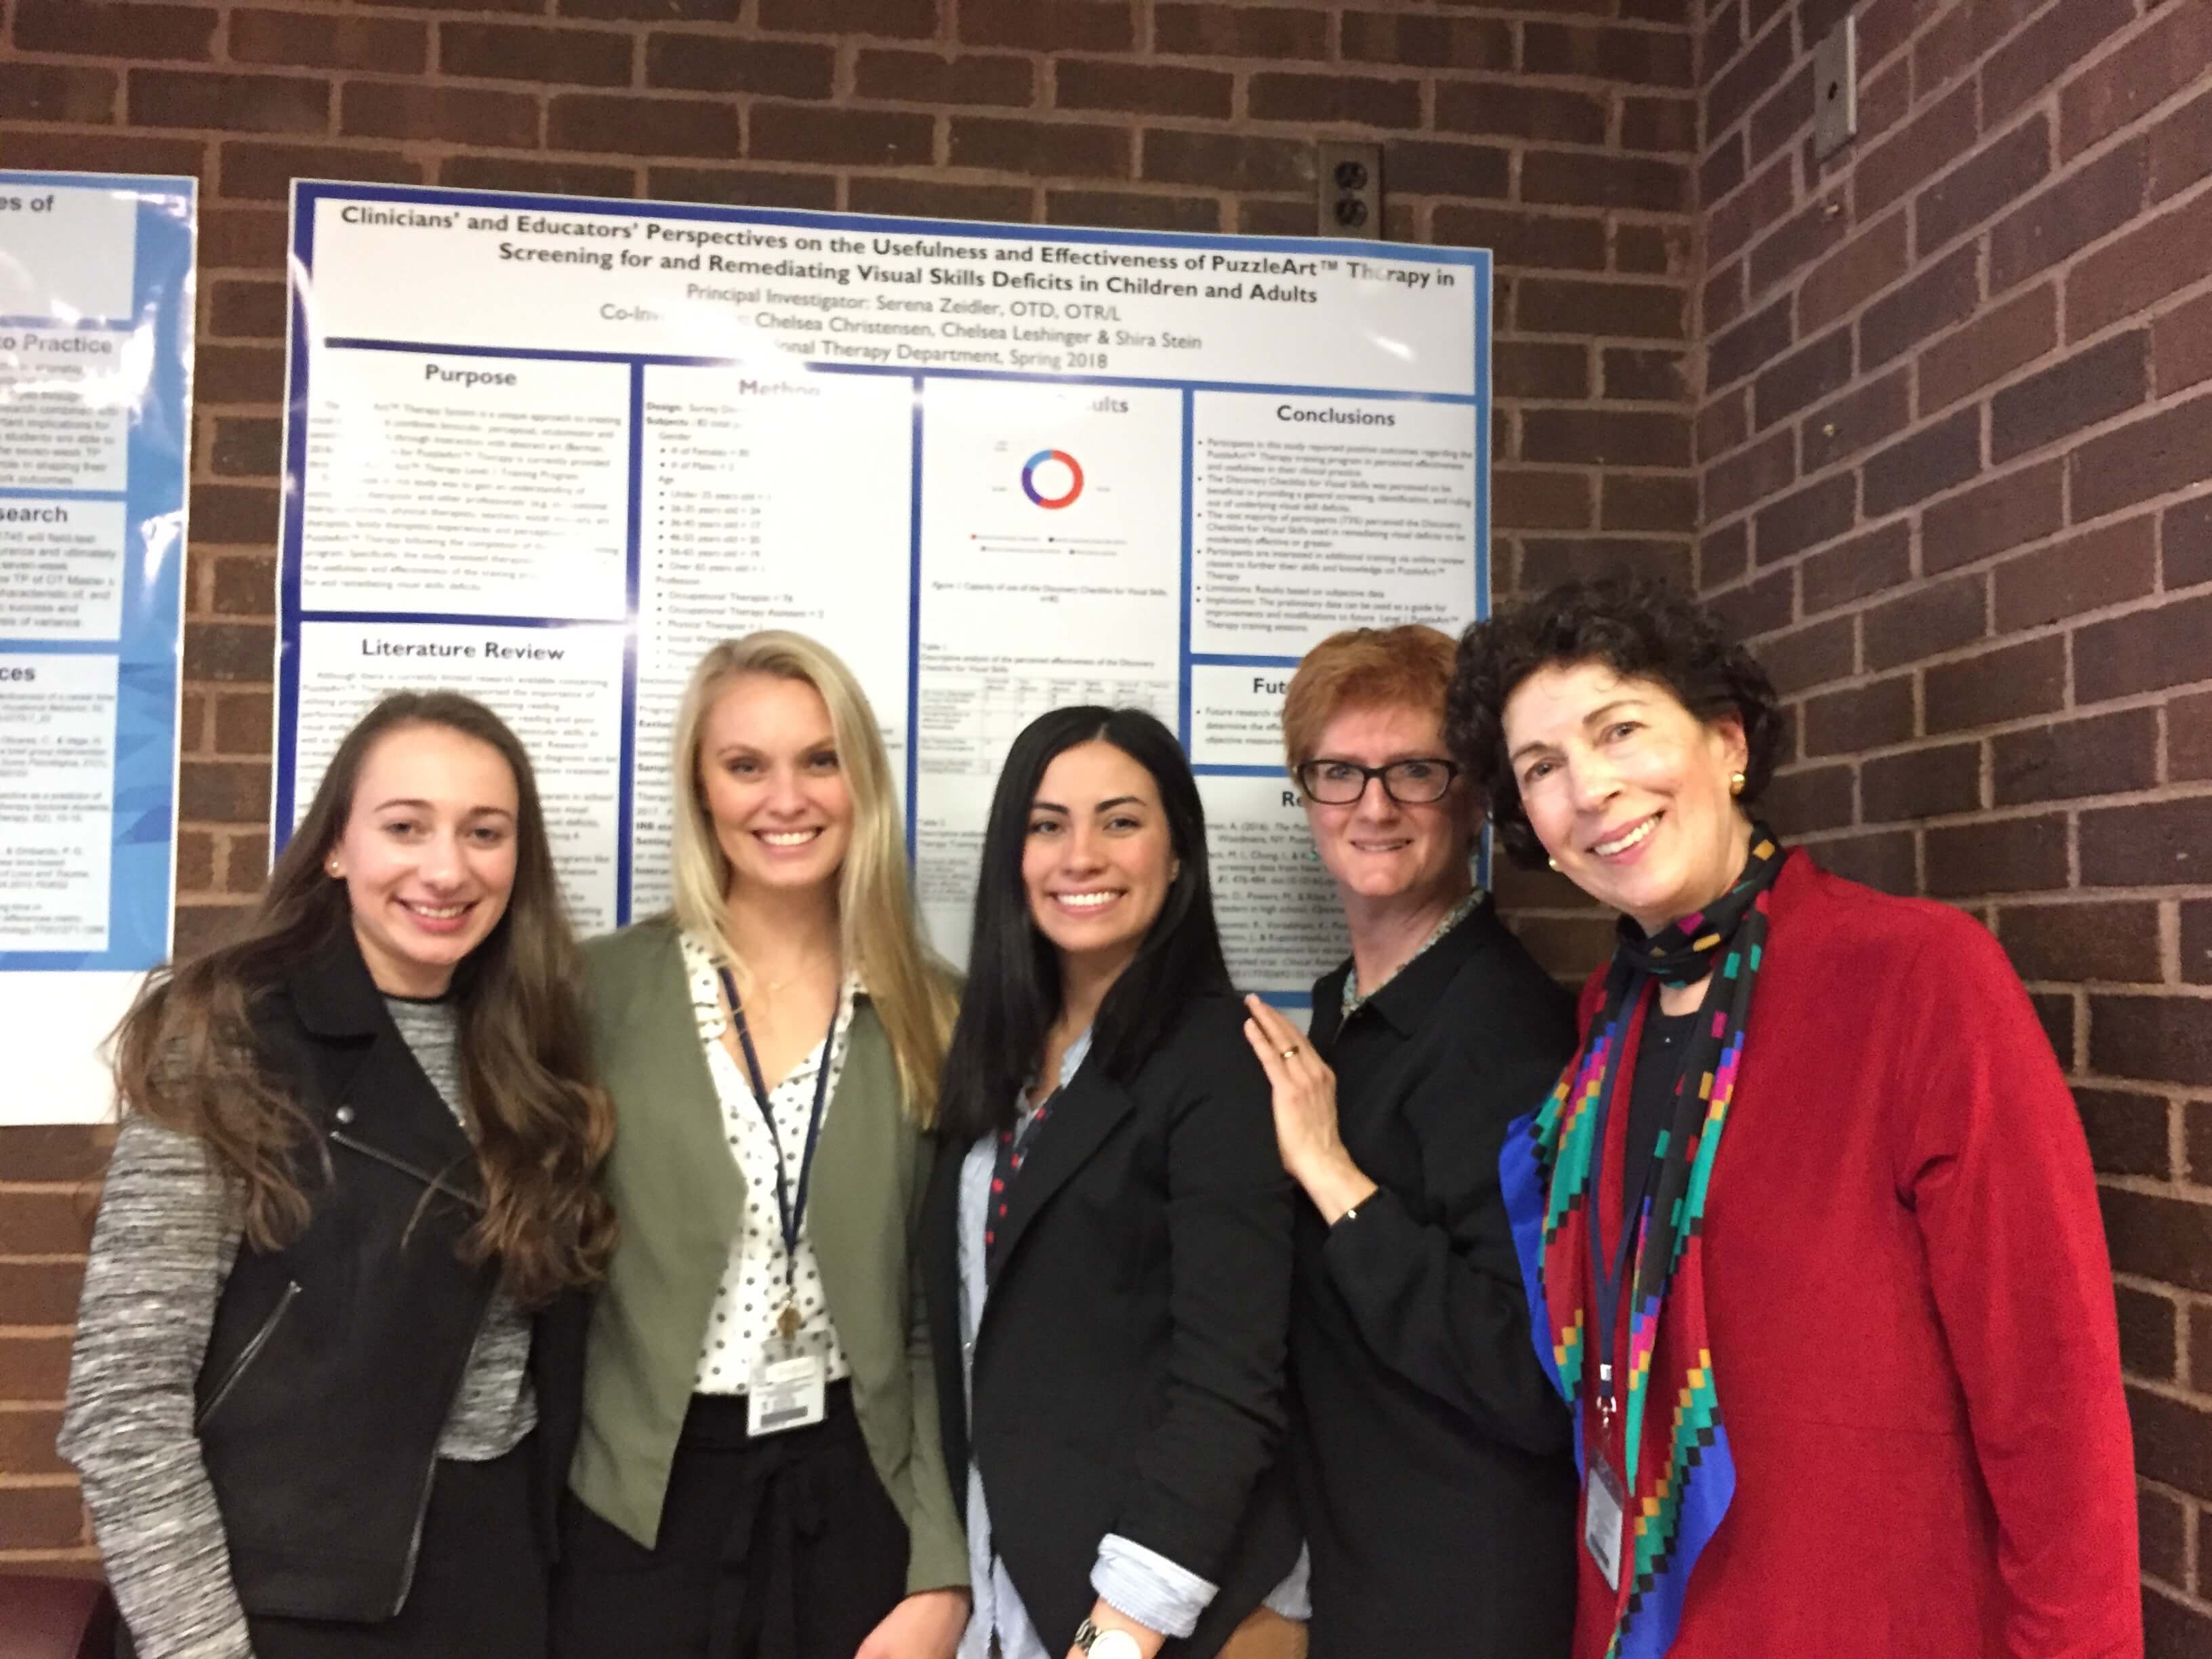 Students at the School of Health Sciences Occupational Therapy program delivered their final presentations in May. Above, students worked with SHS OT Professor Serena Zeidler (far right) to examine the efficacy of a new therapy tool.